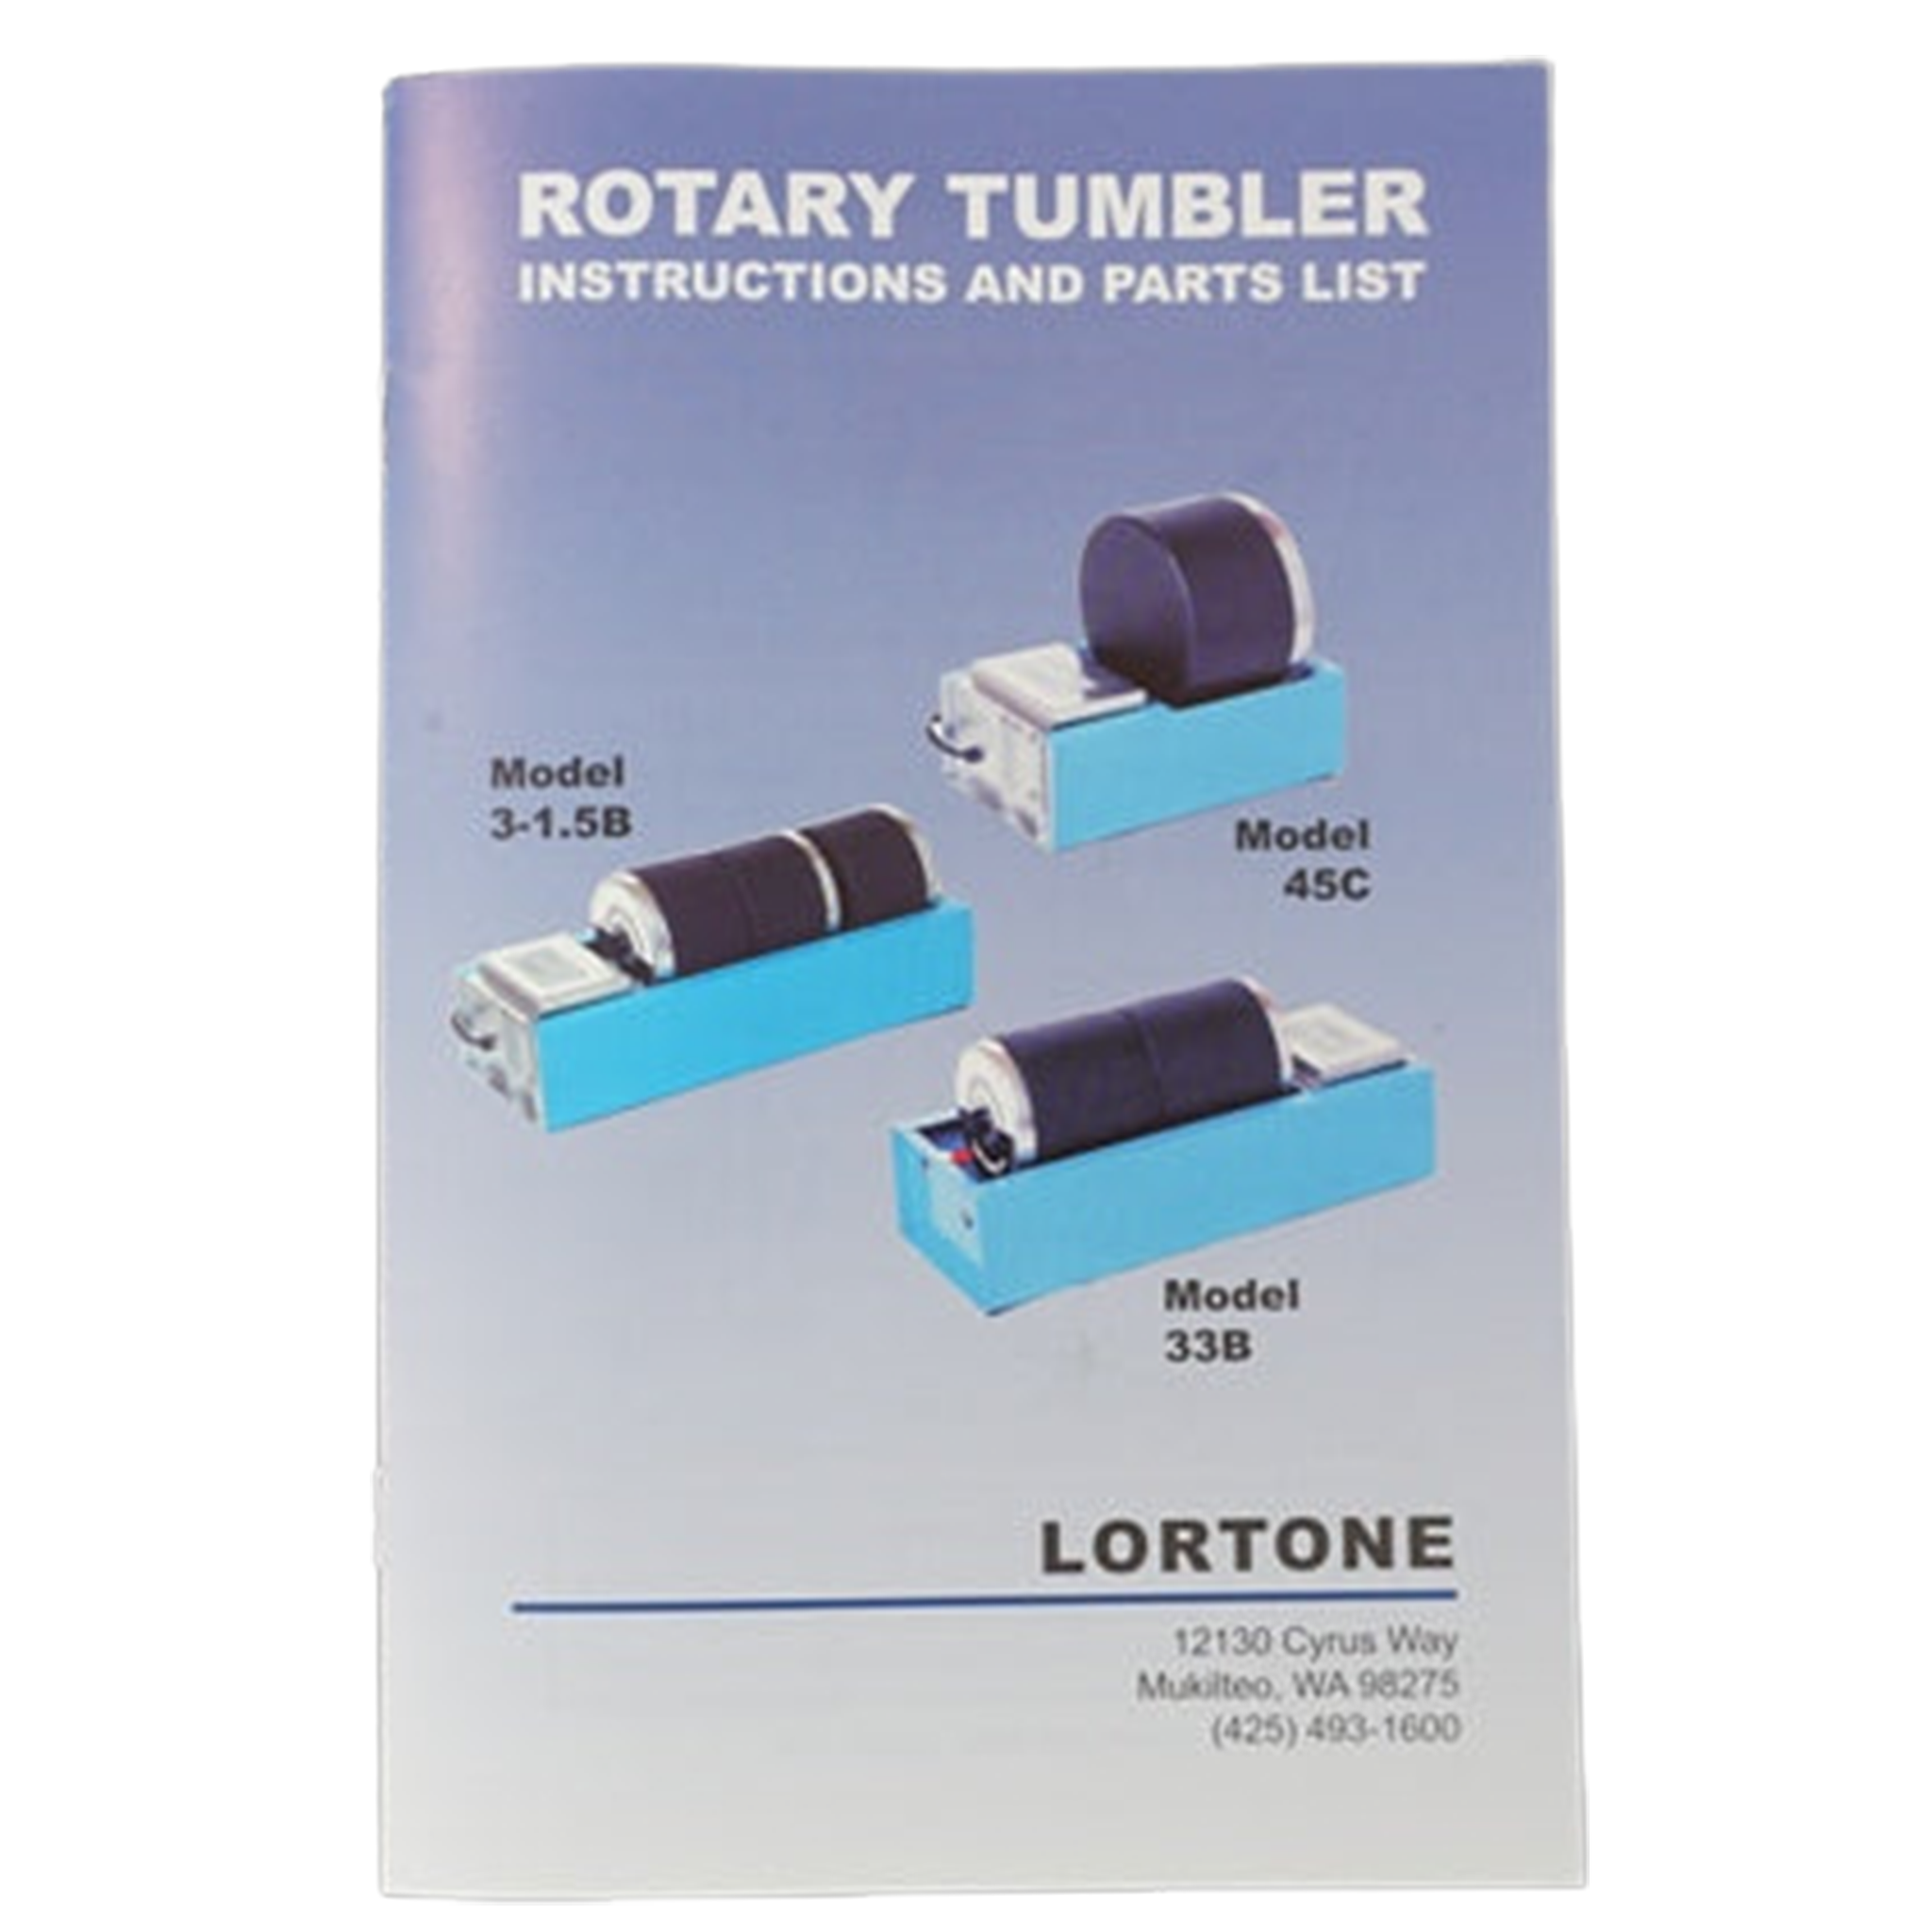 Lortone QT-12 Rotary Tumbler compared to Thumlers Tumbler A-R12